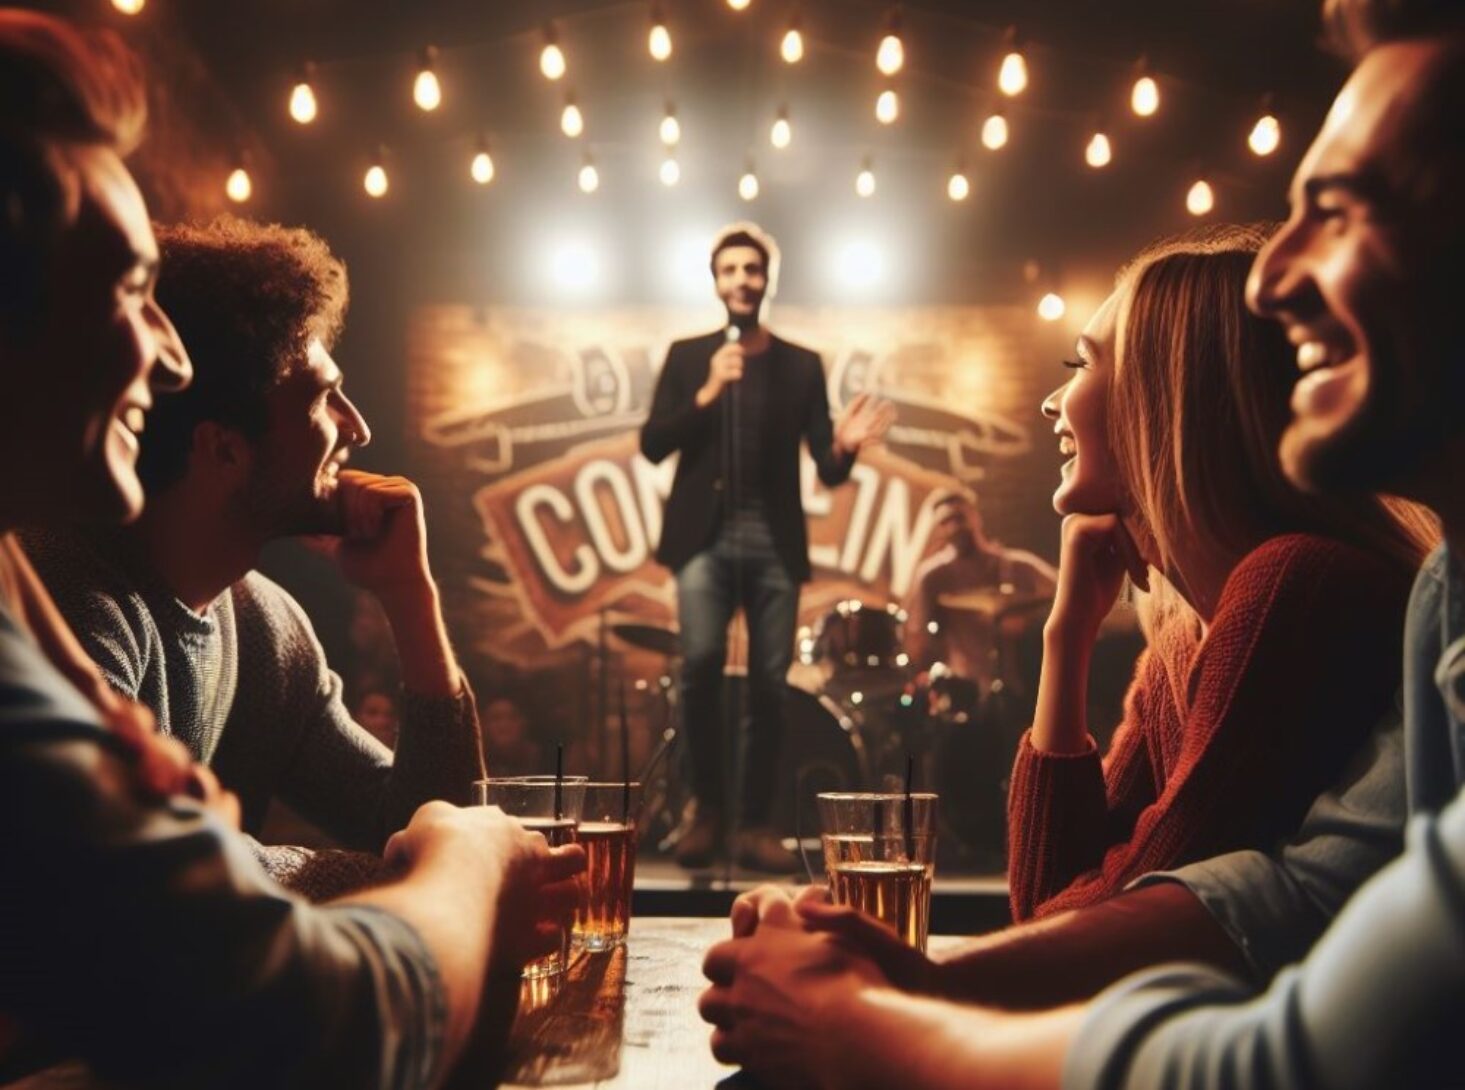 The Best Brighton Venues for Live Comedy